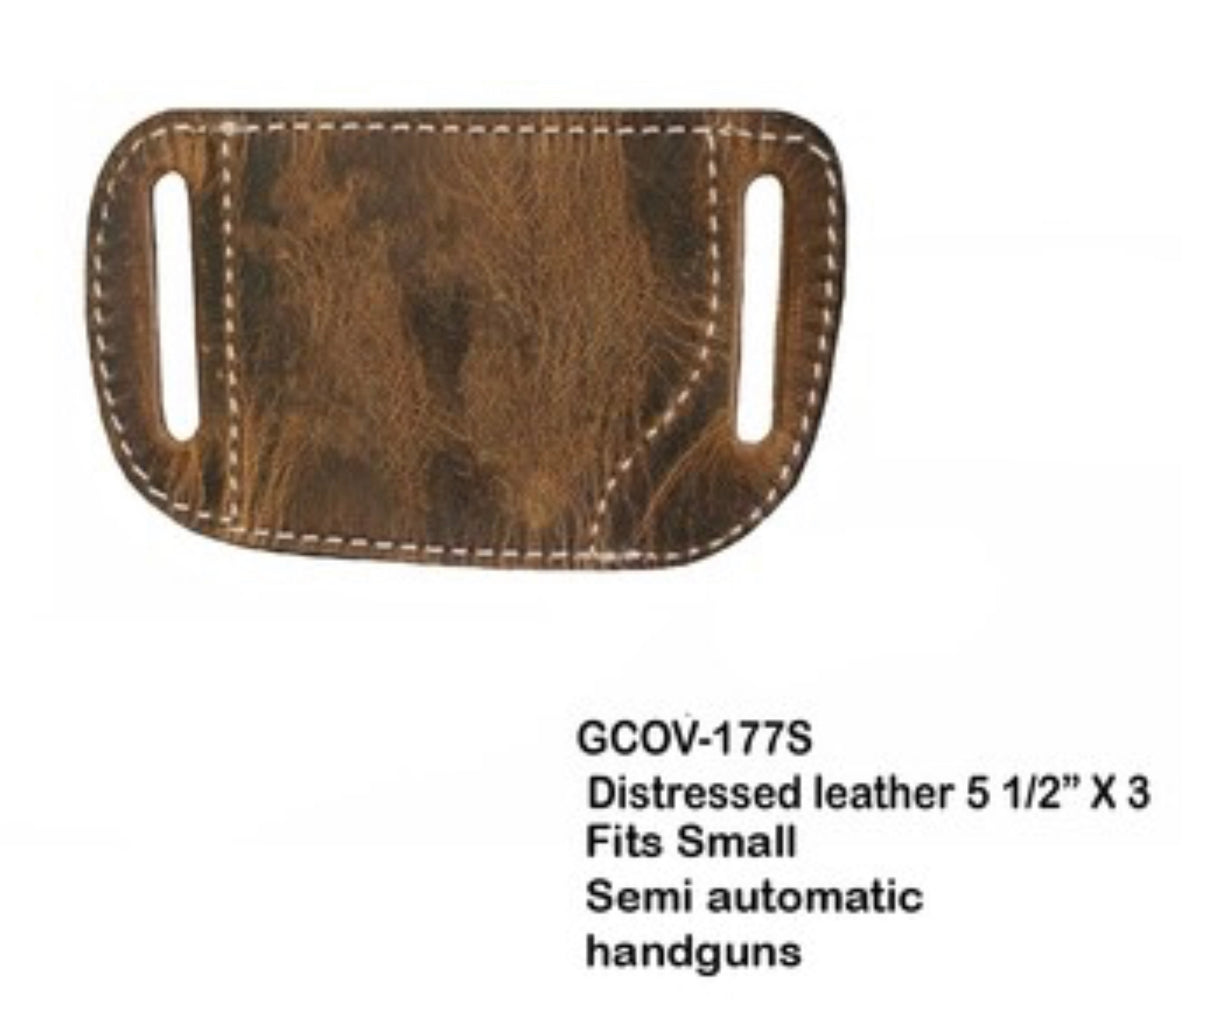 WESTERN FASHION DISTRESSED LEATHER HOLSTER GCOV-177S